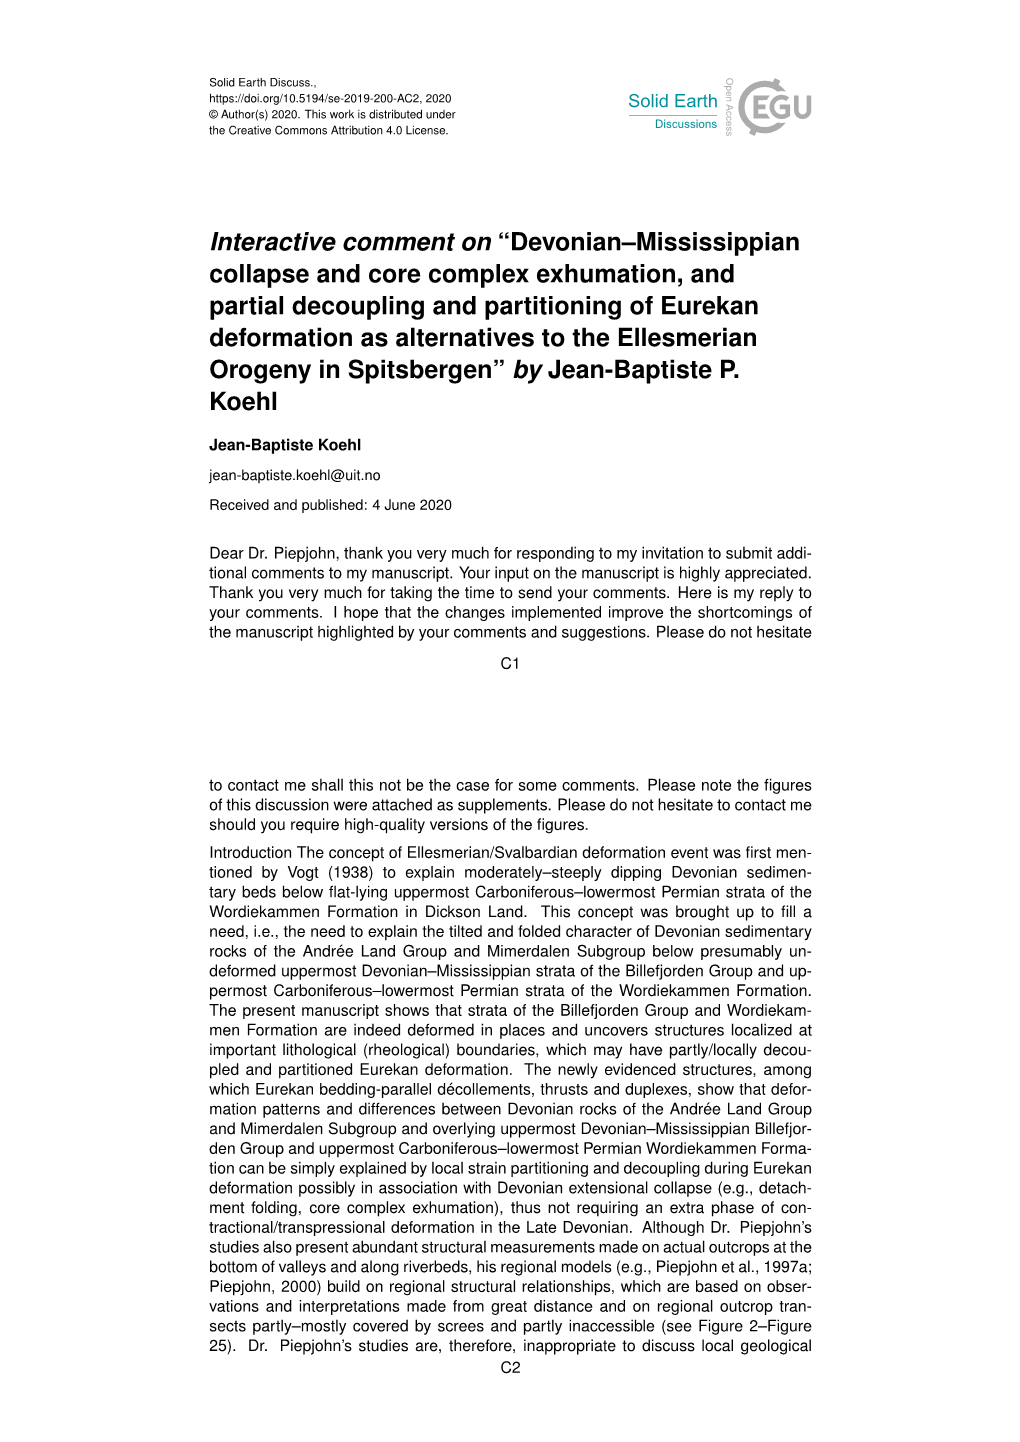 Devonian–Mississippian Collapse and Core Complex Exhumation, And